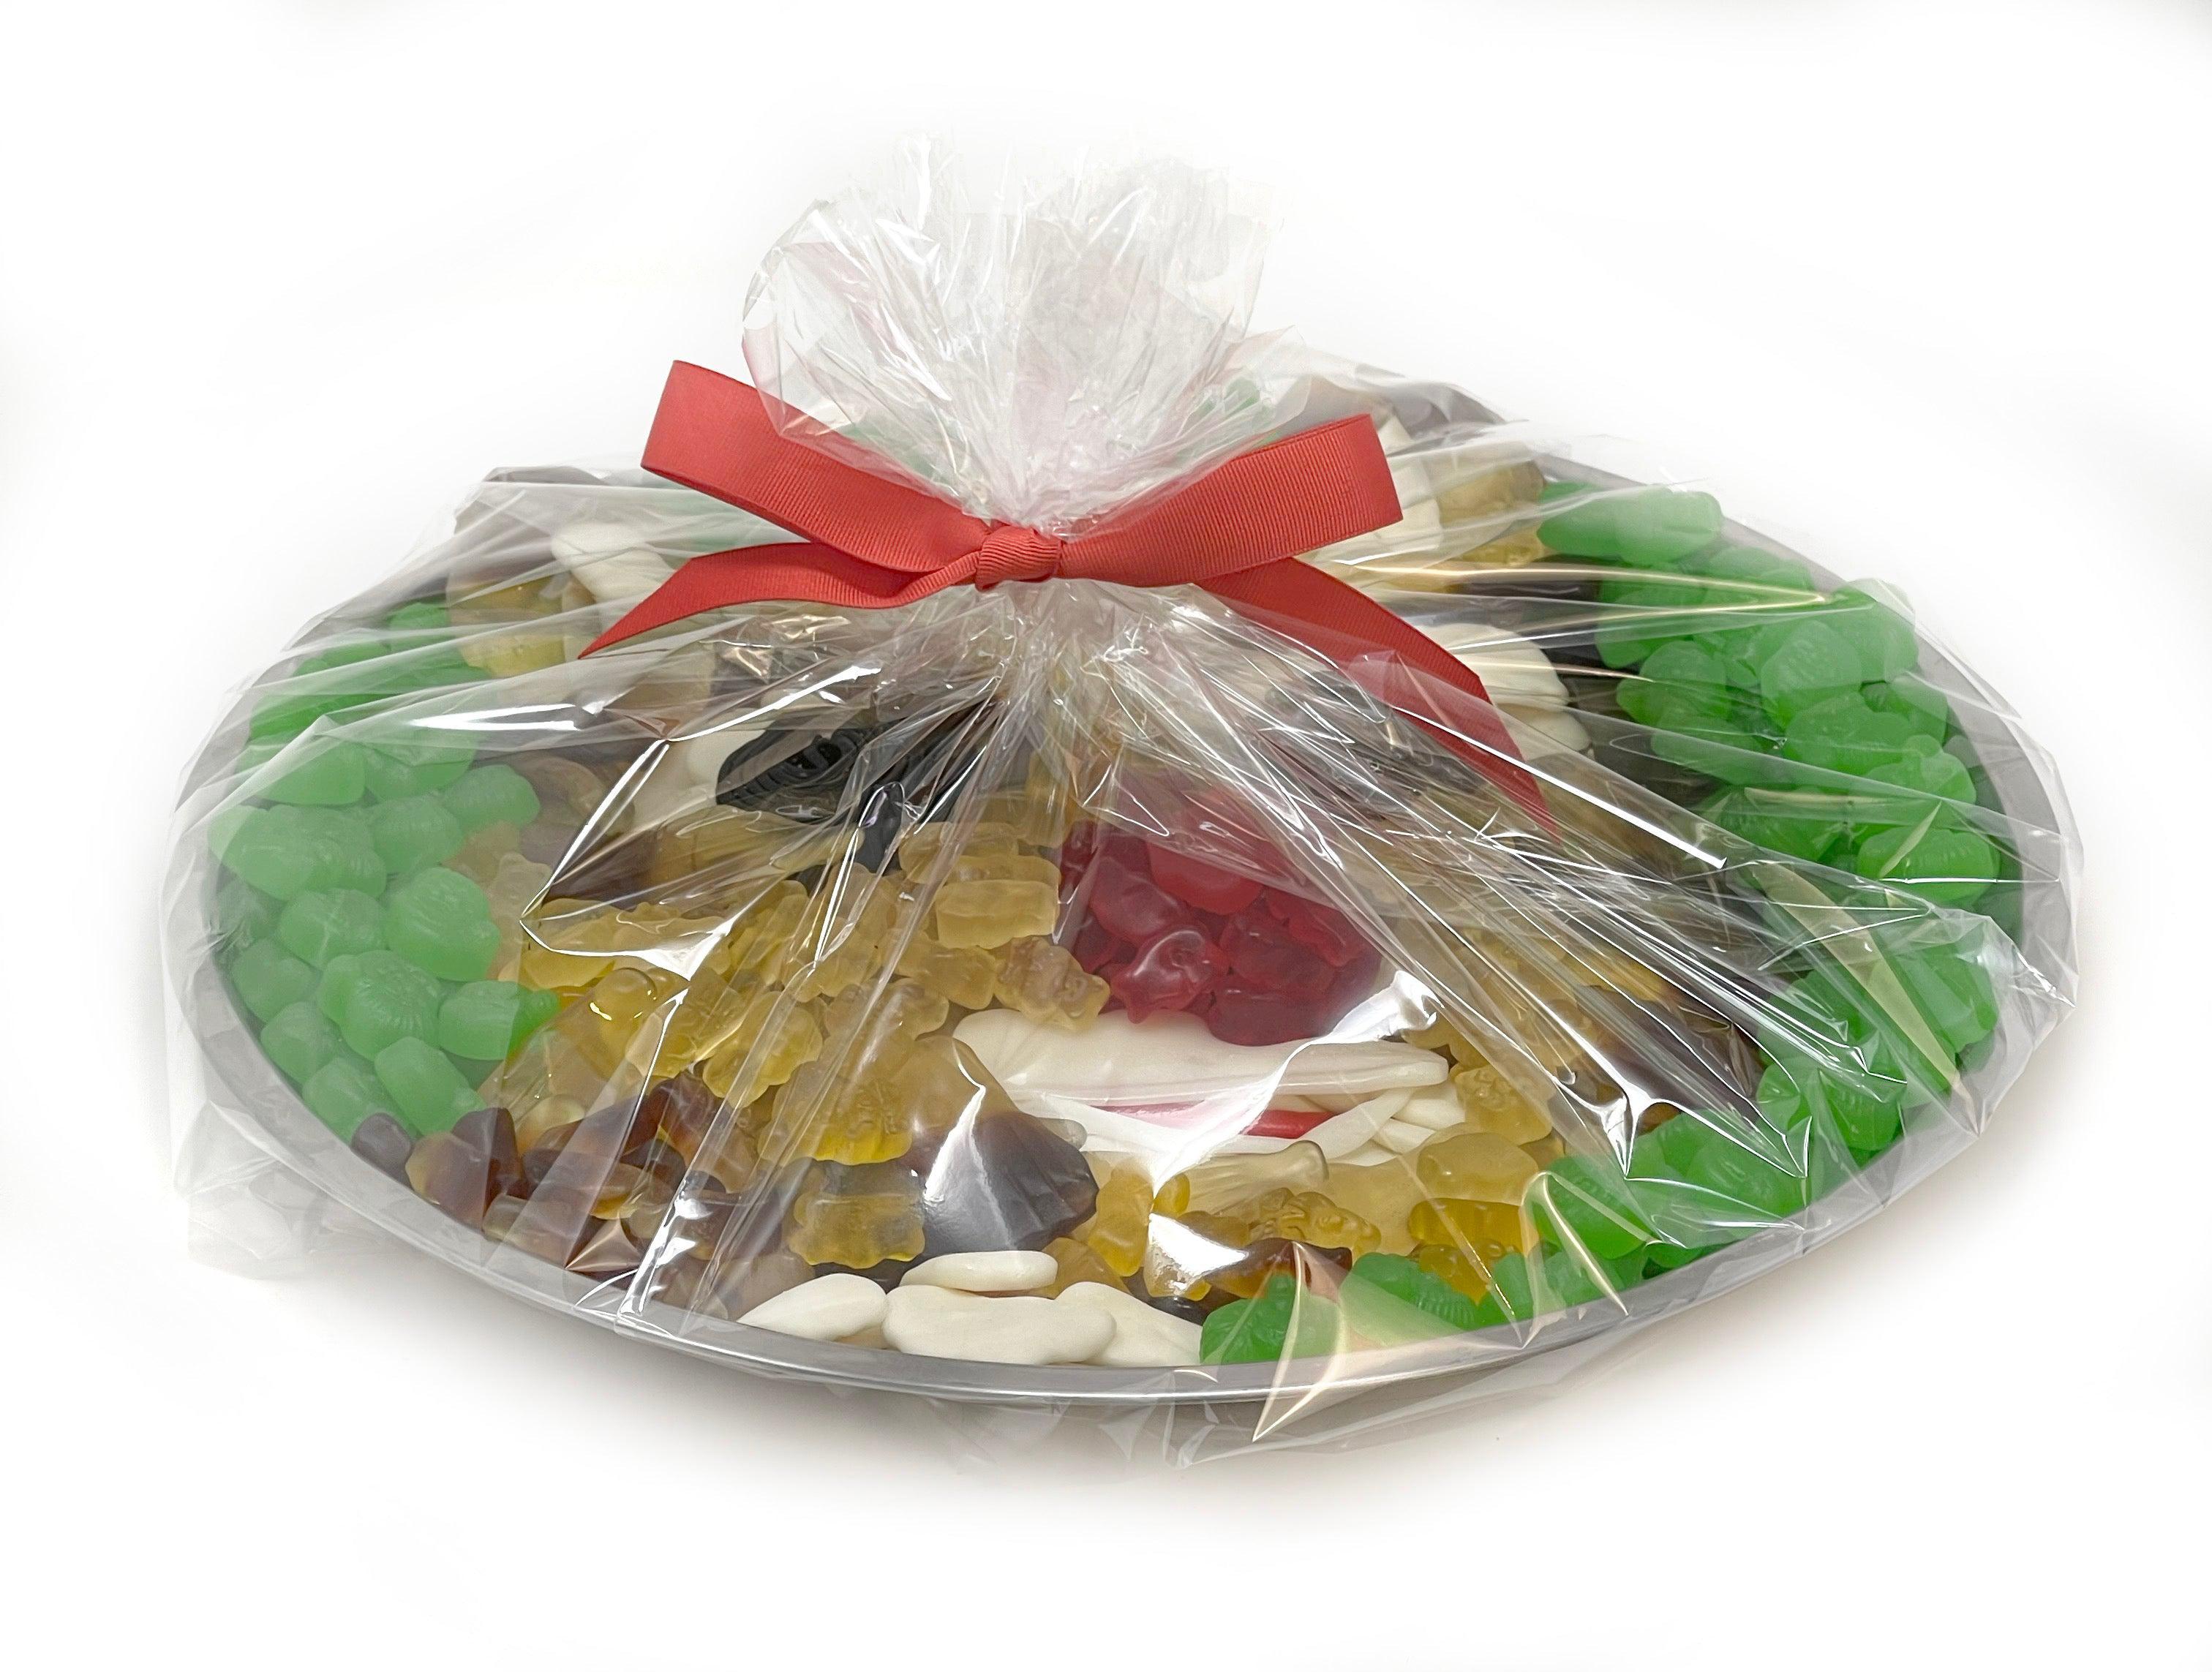 Reindeer Candy Platter-Charcuterie-Corporate Catering Toronto-Best Charcuterie-Catering Toronto-Cured Catering